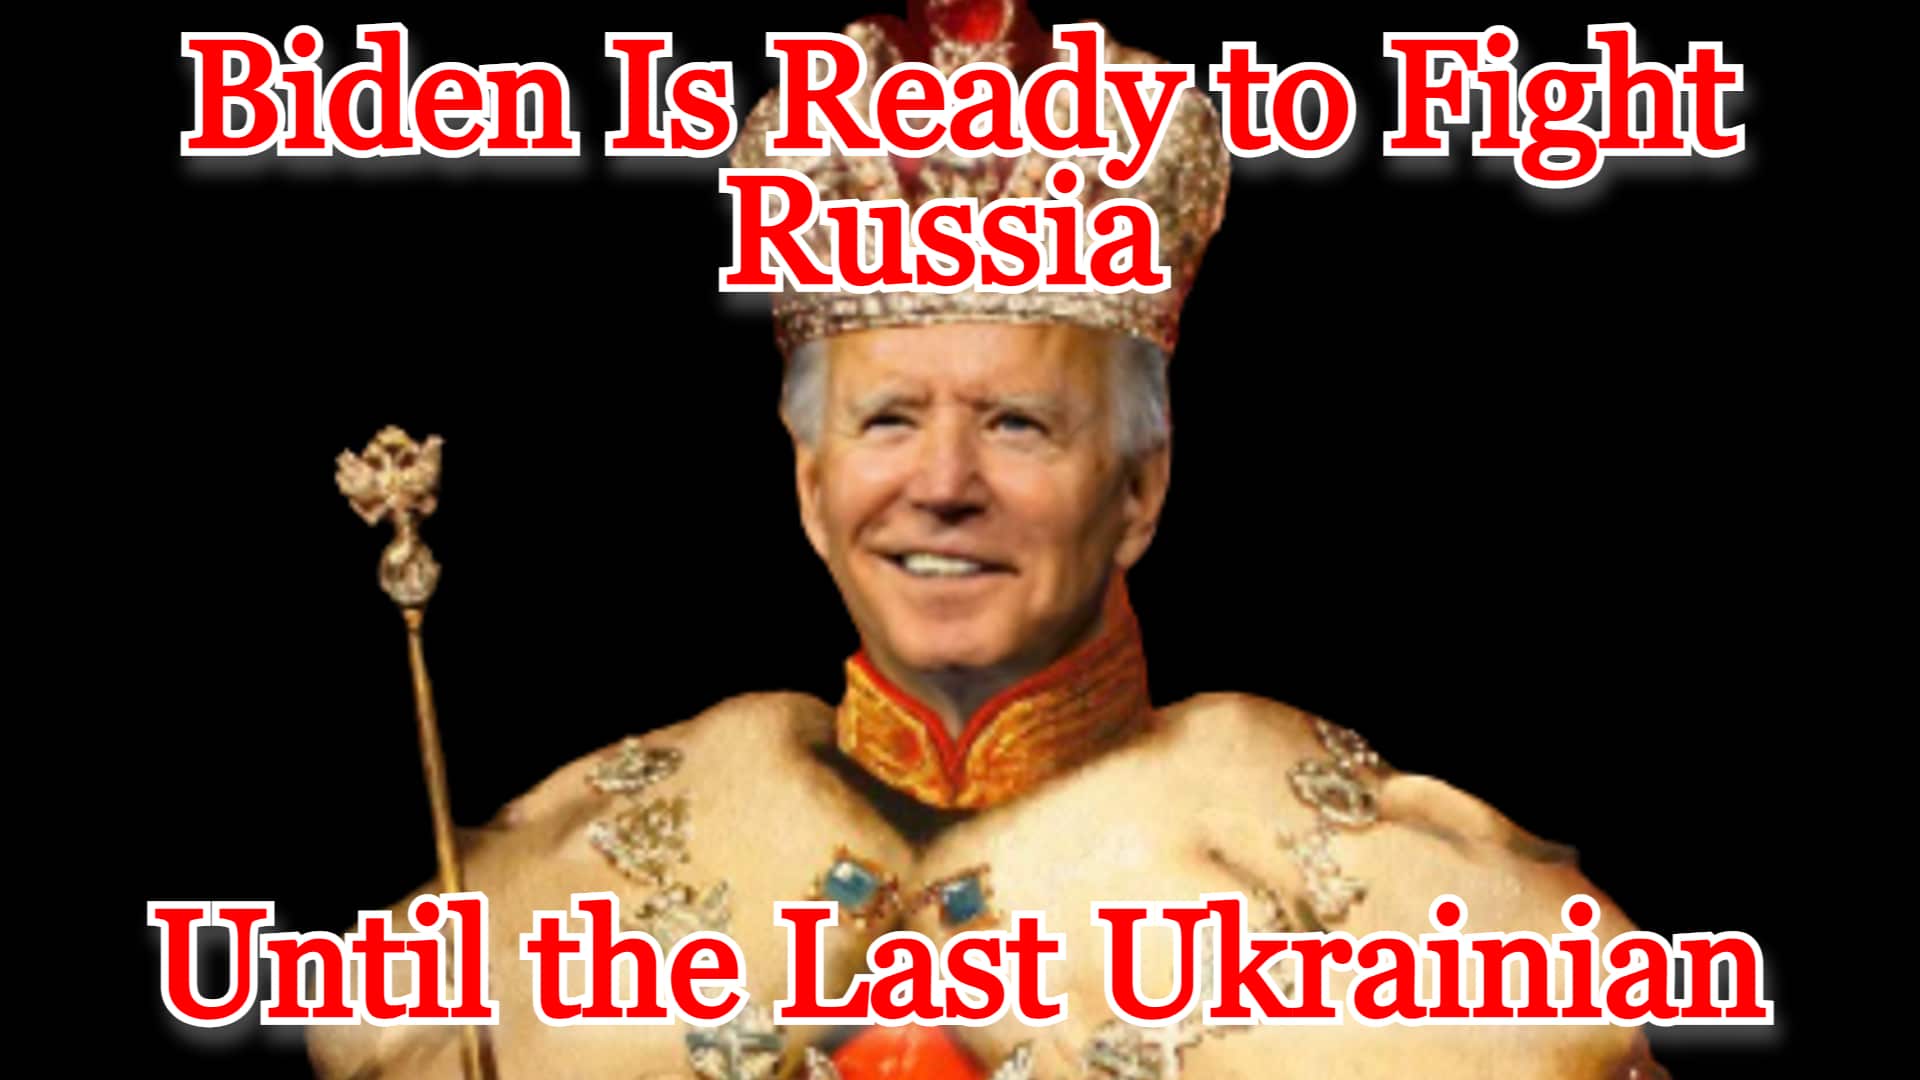 COI #460: Biden Is Ready to Fight Russia Until the Last Ukrainian